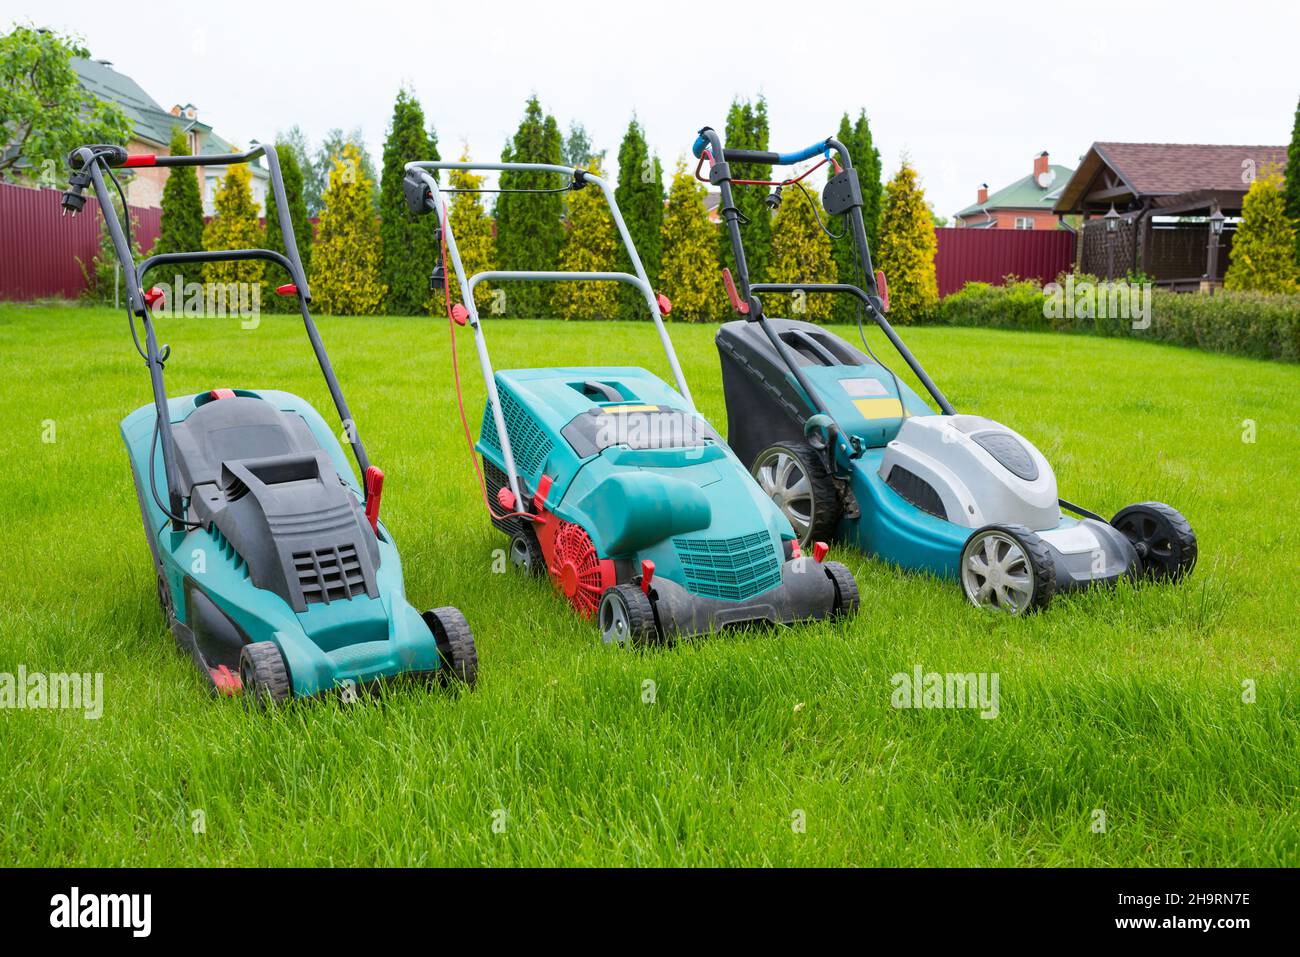 lawn mowers in the backyard. Gardening concept. Grass care. Stock Photo